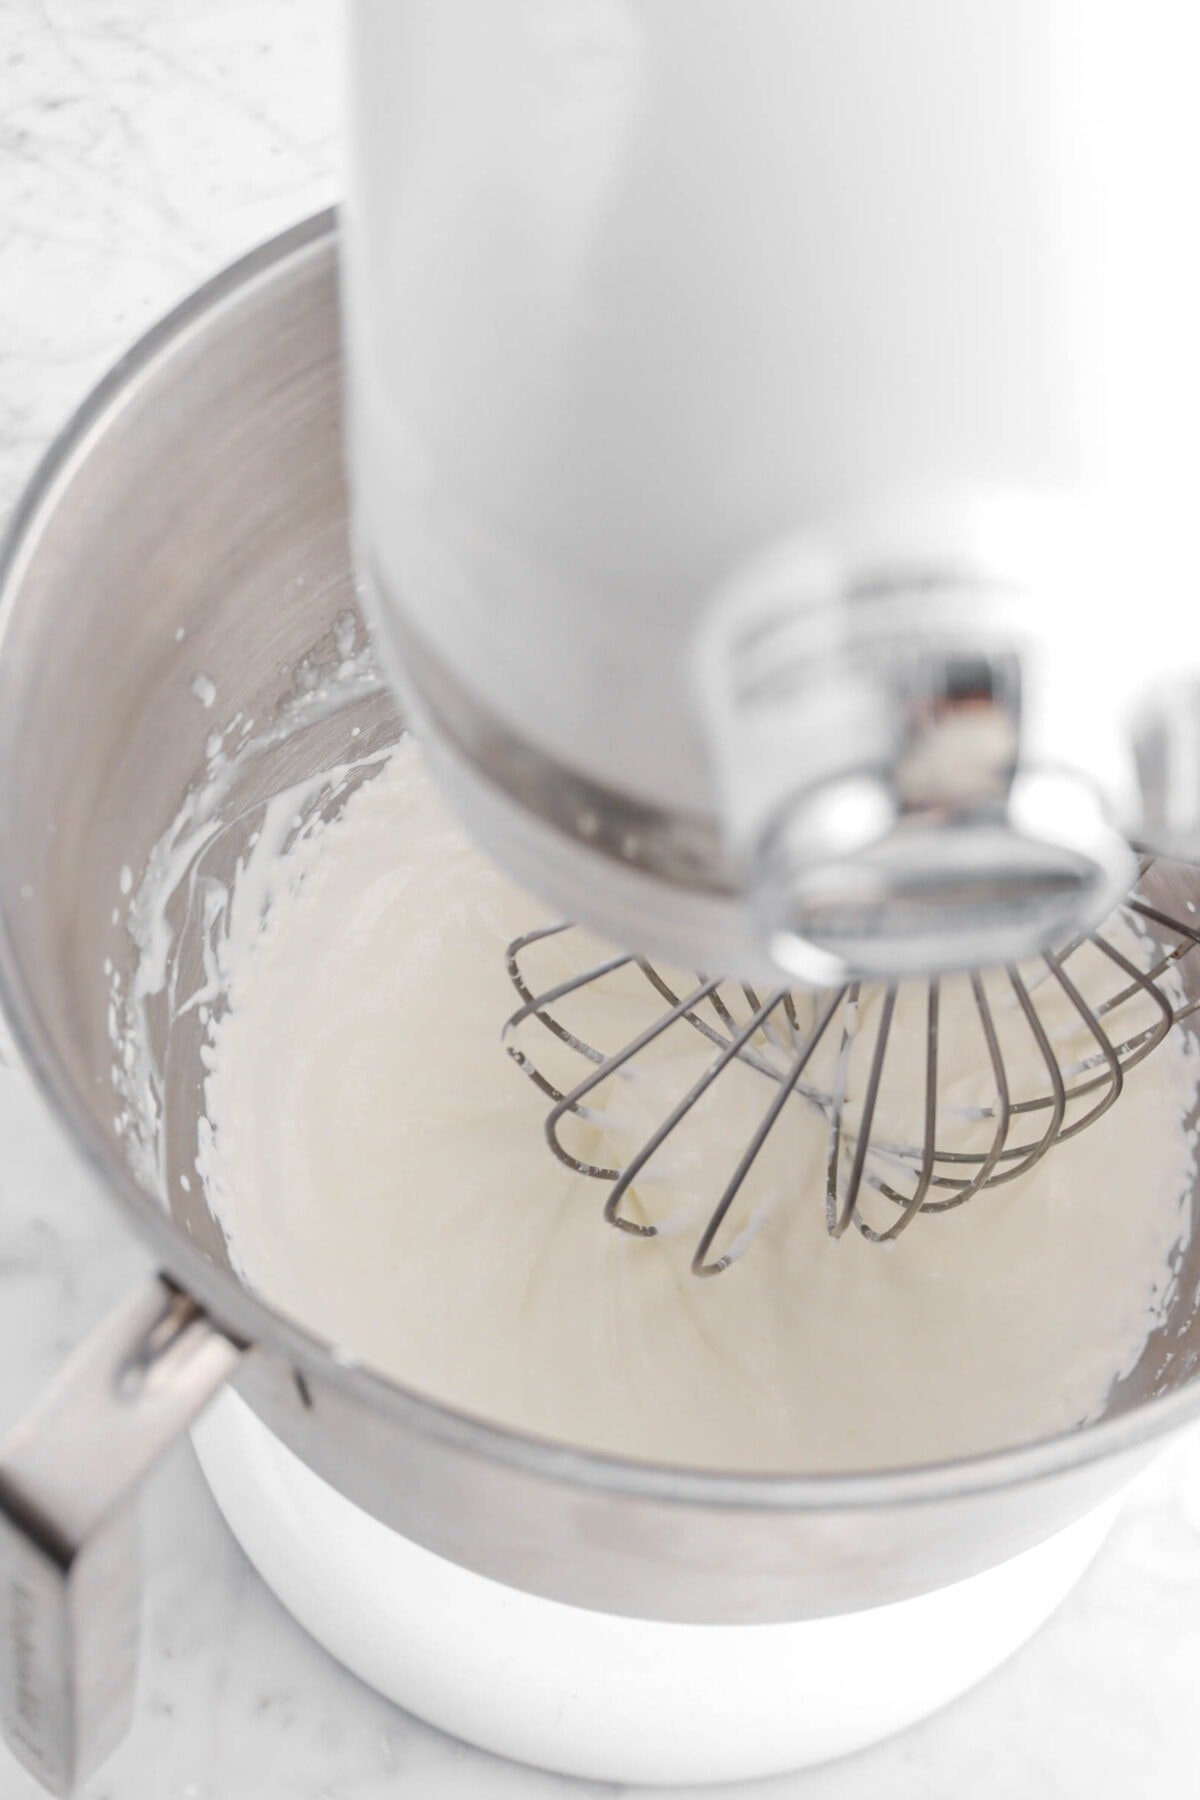 whipped heavy cream in stand mixer